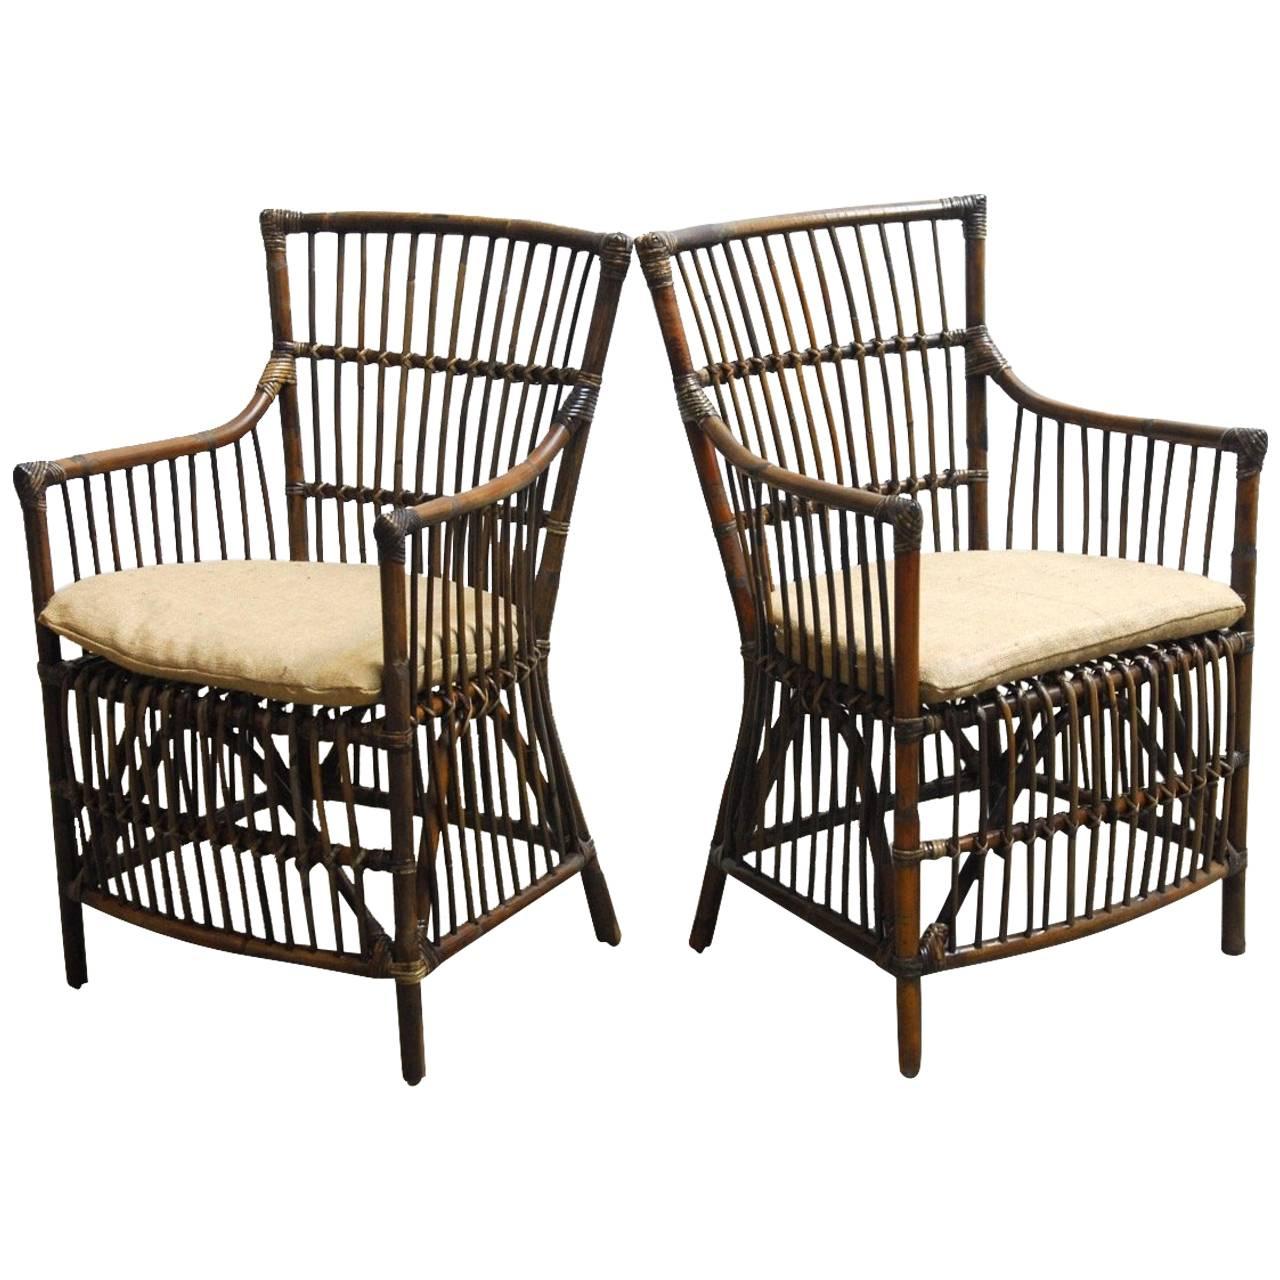 Pair of Asian Bamboo and Rattan Armchairs 